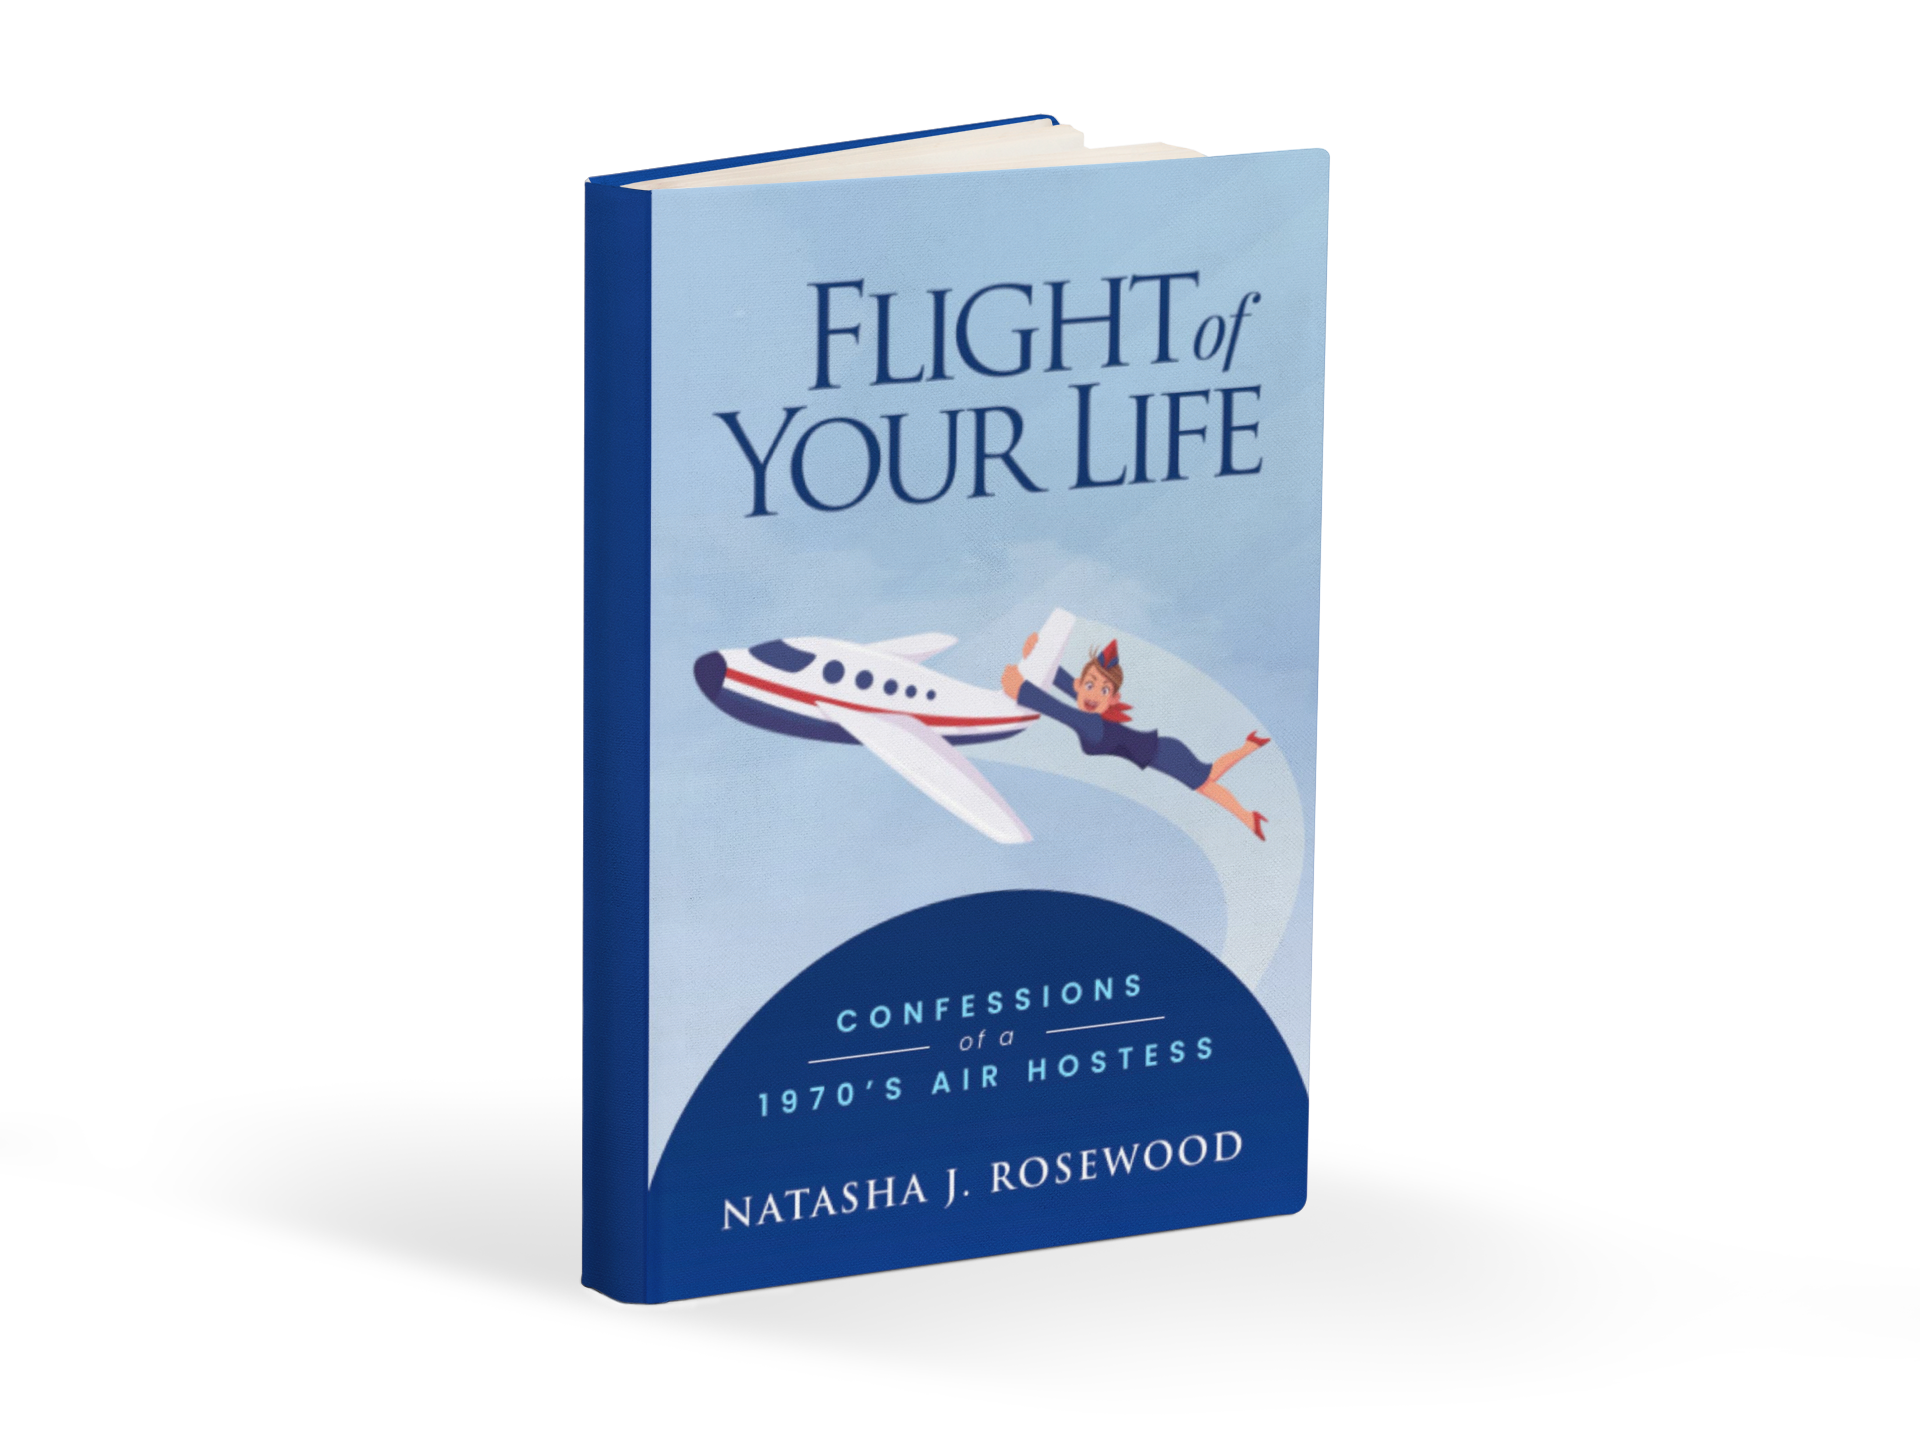 Natasha J. Rosewood’s Flight of Your Life Revisits a Golden Age in Travel, Reminding Readers to Have Fun While Facing Adversity